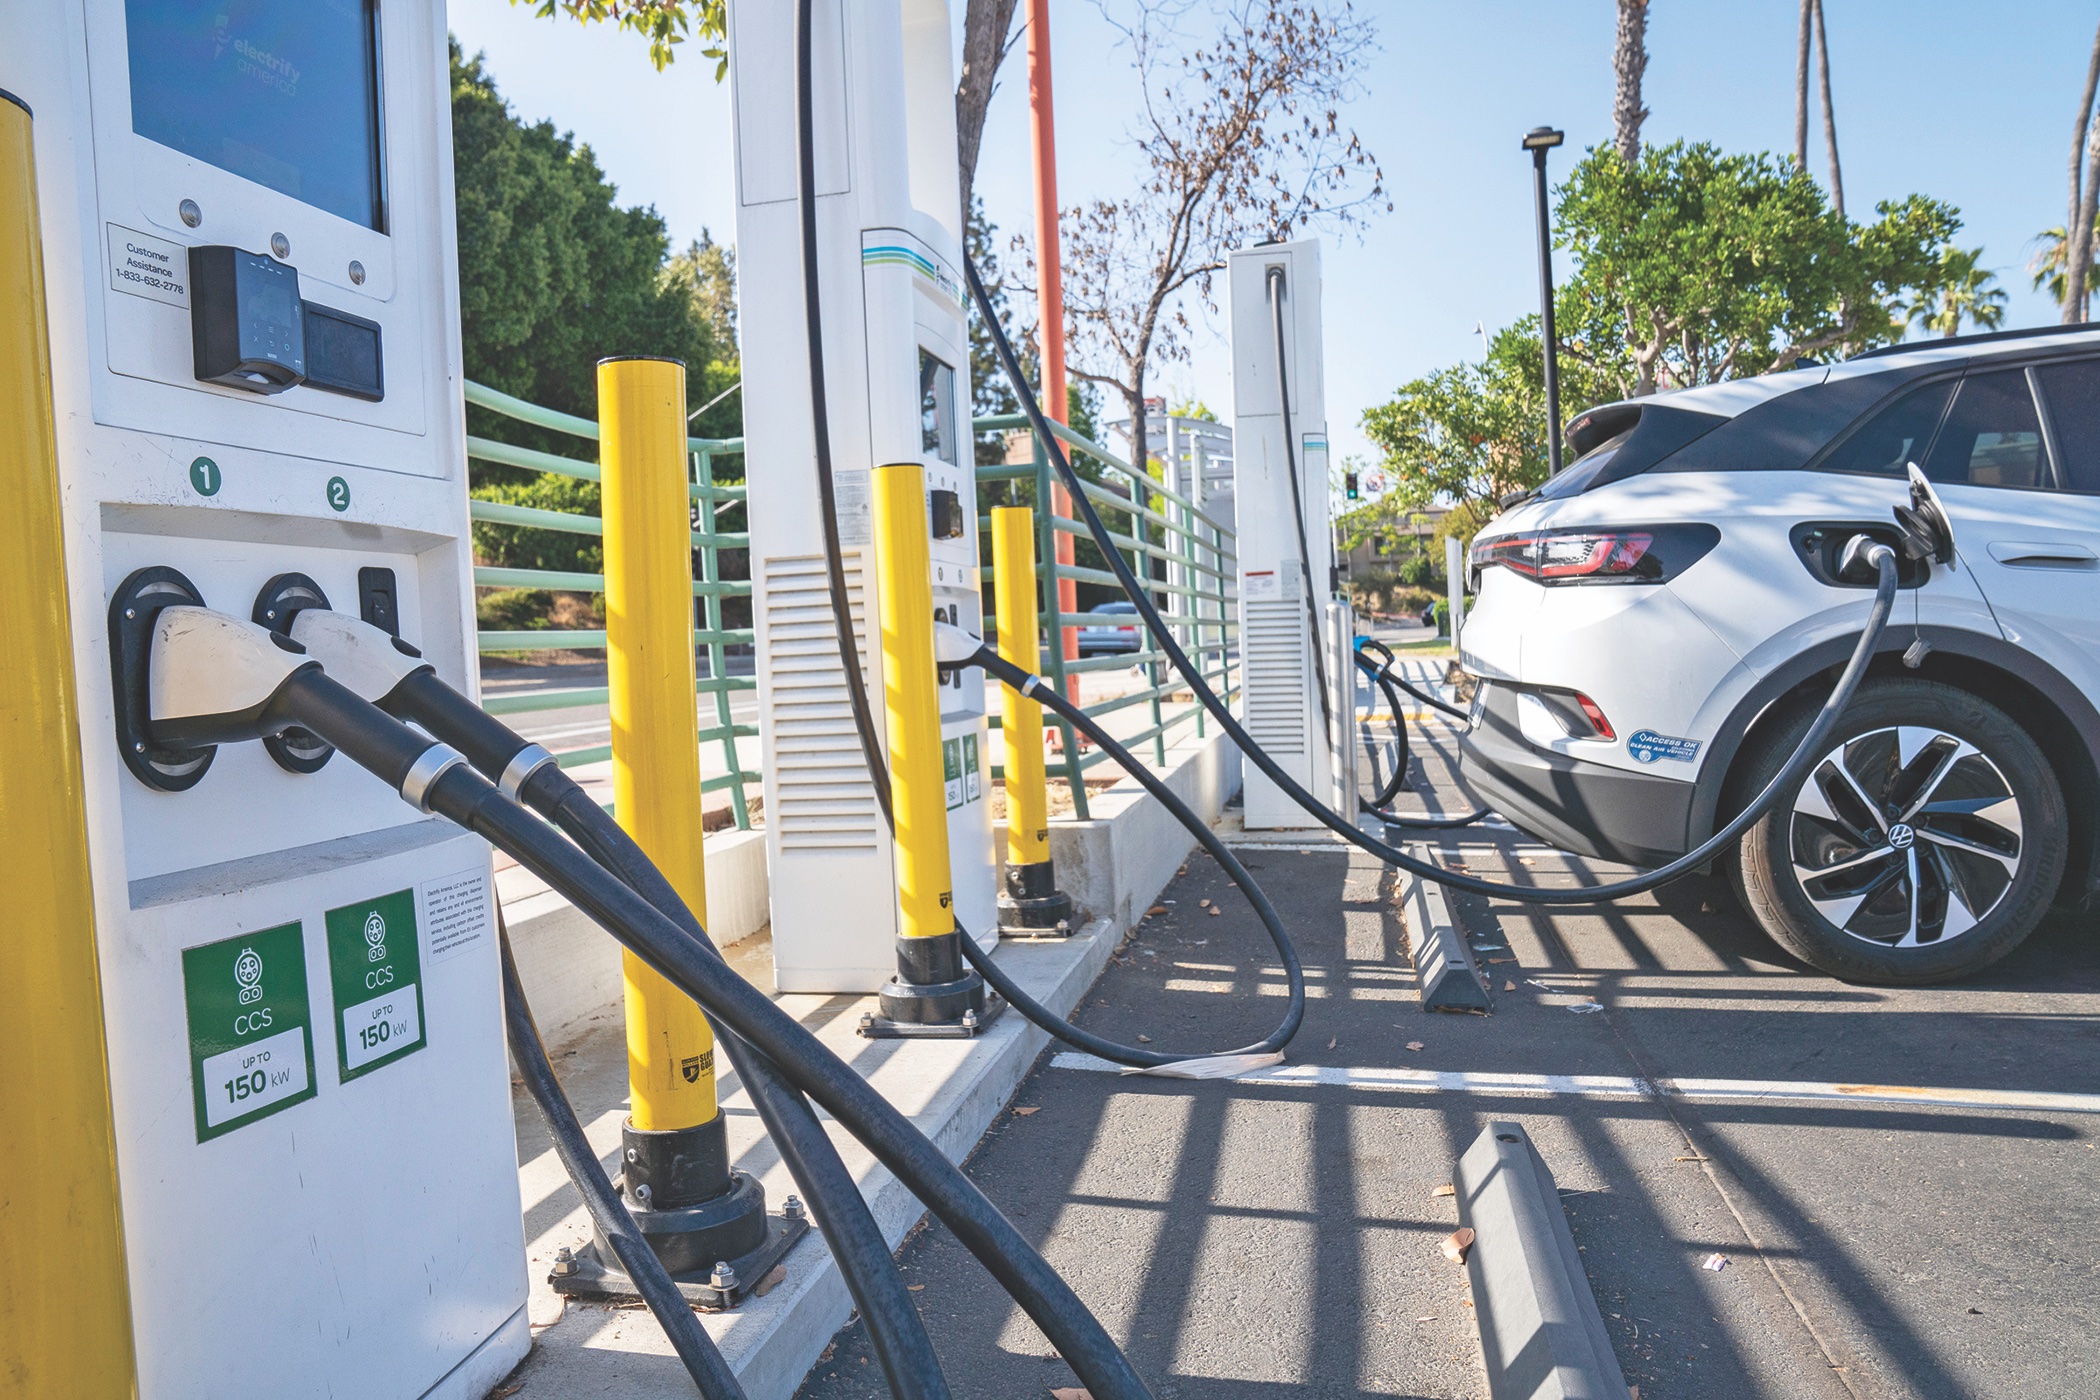 bp expands access to EV charge points for Fuel & Charge customers